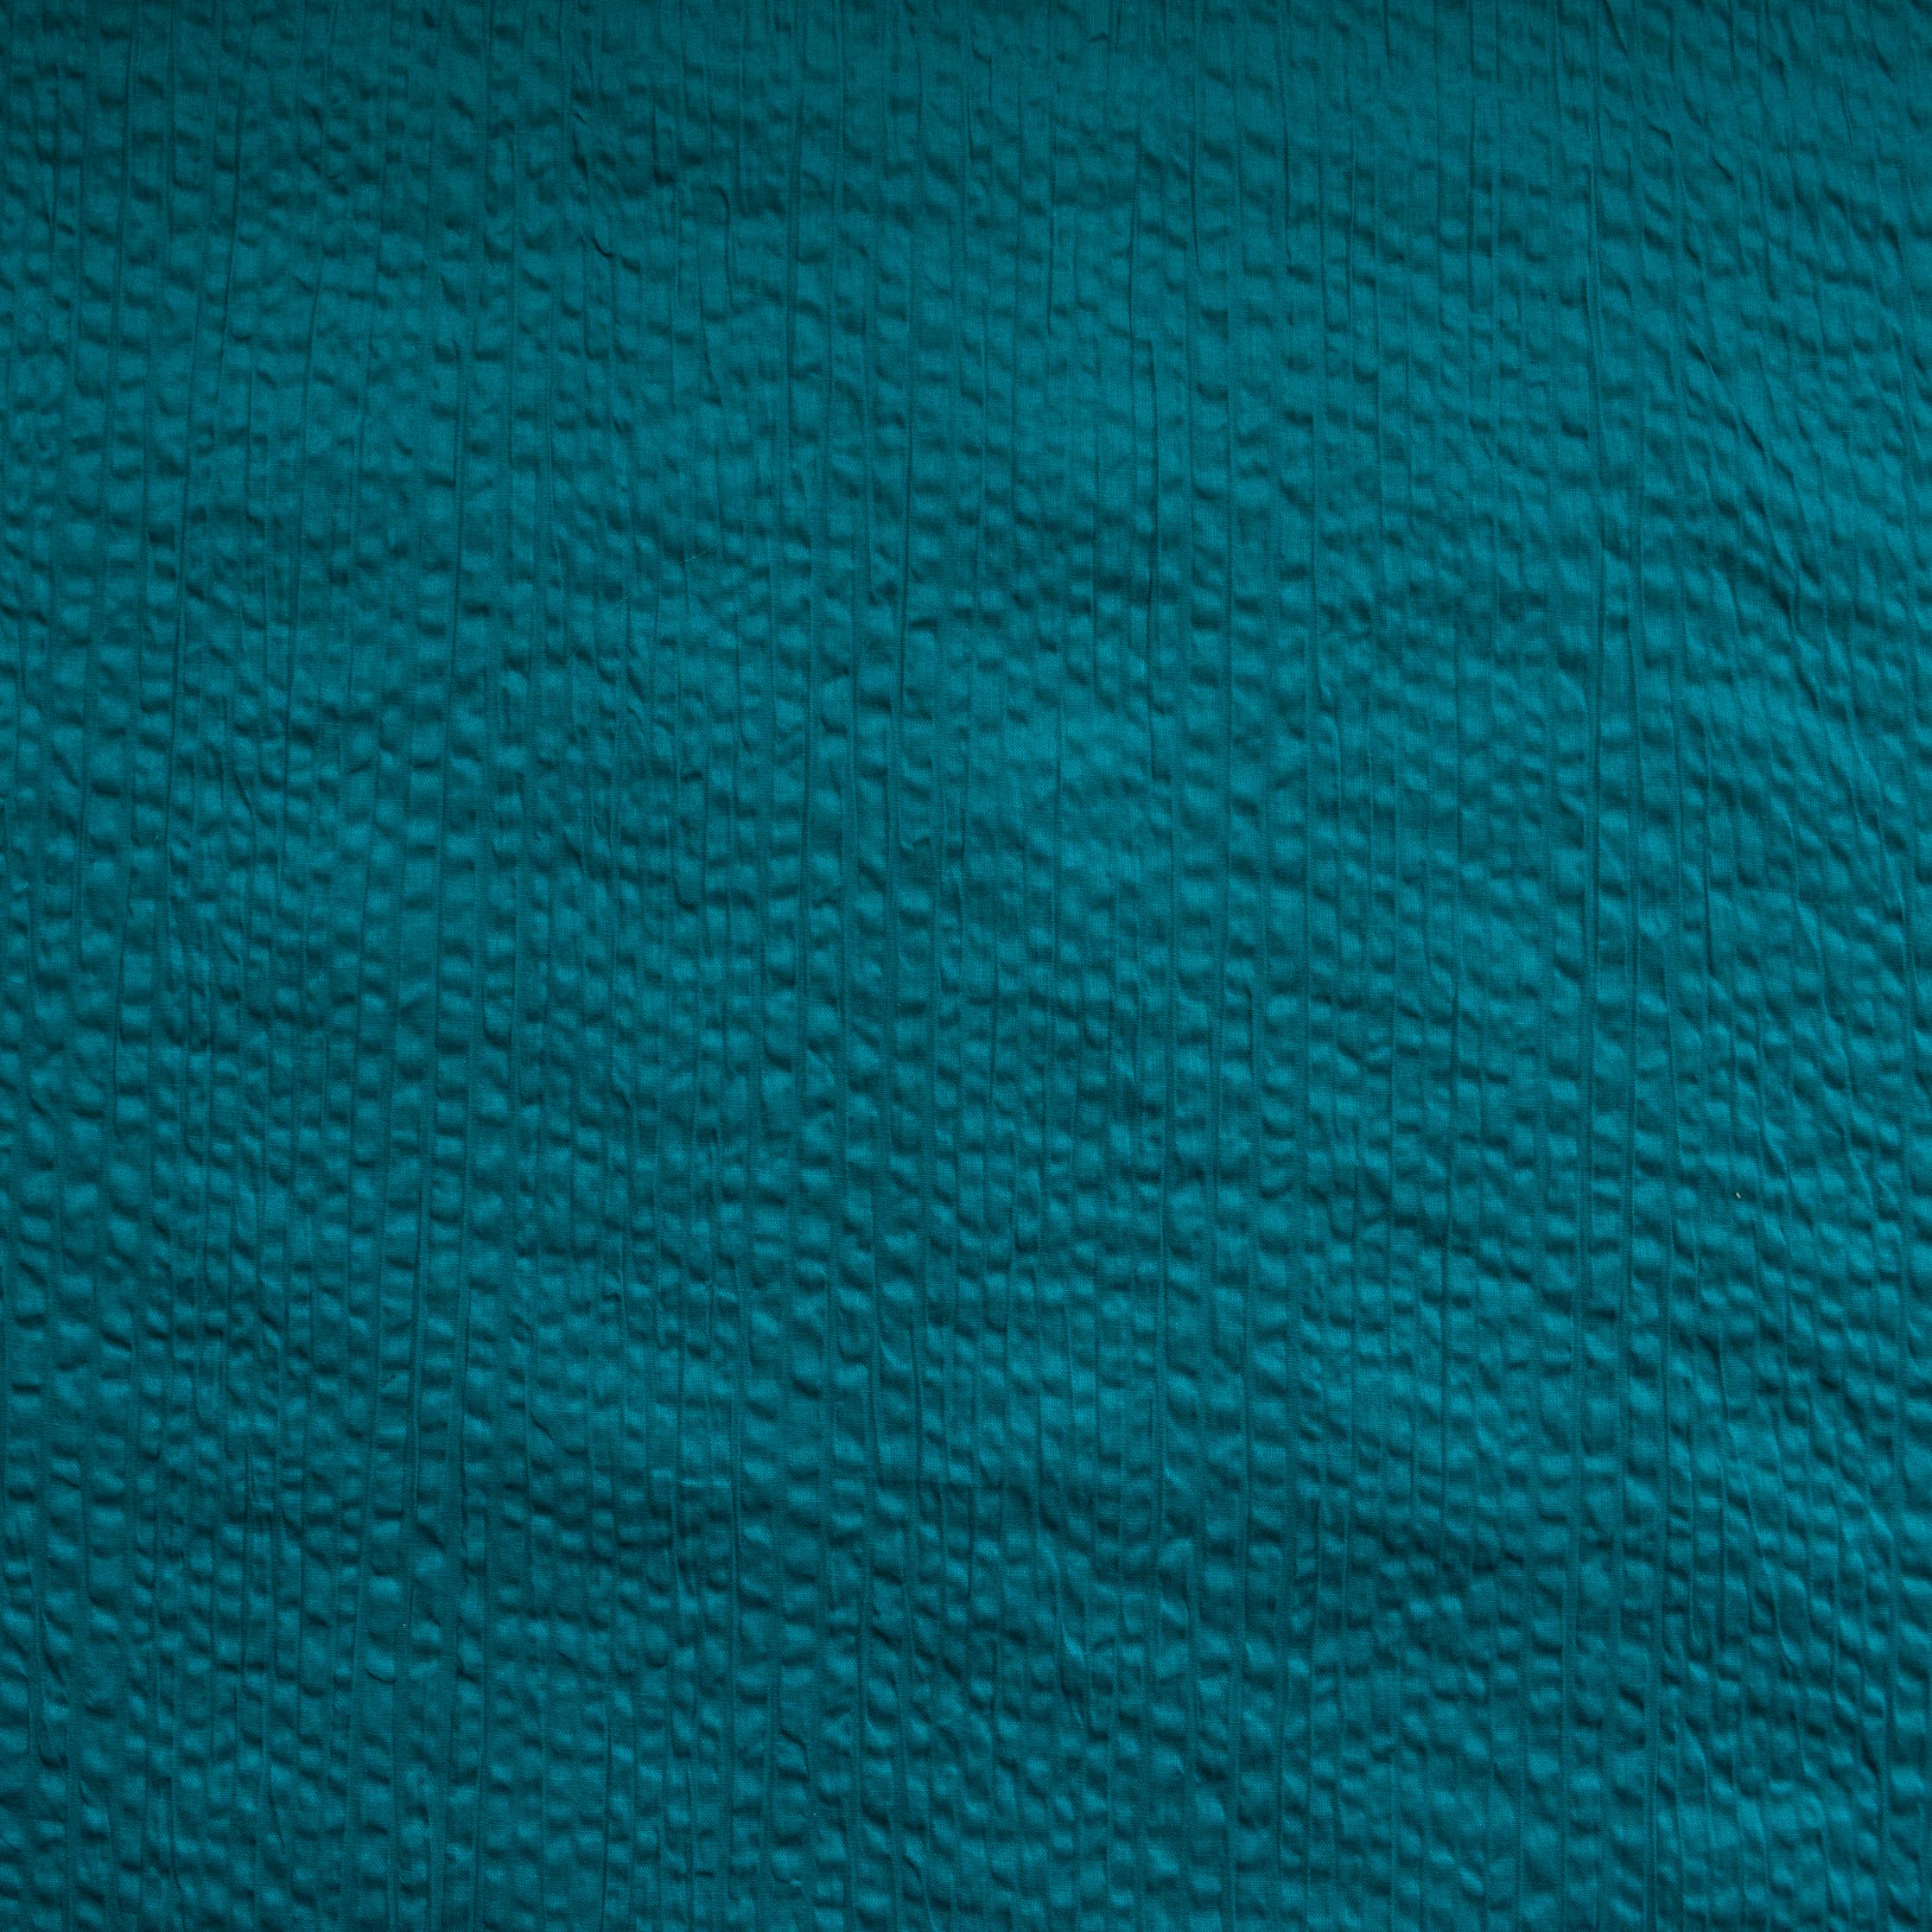 Japanese Crinkle Cotton - Rich Teal - MaaiDesign